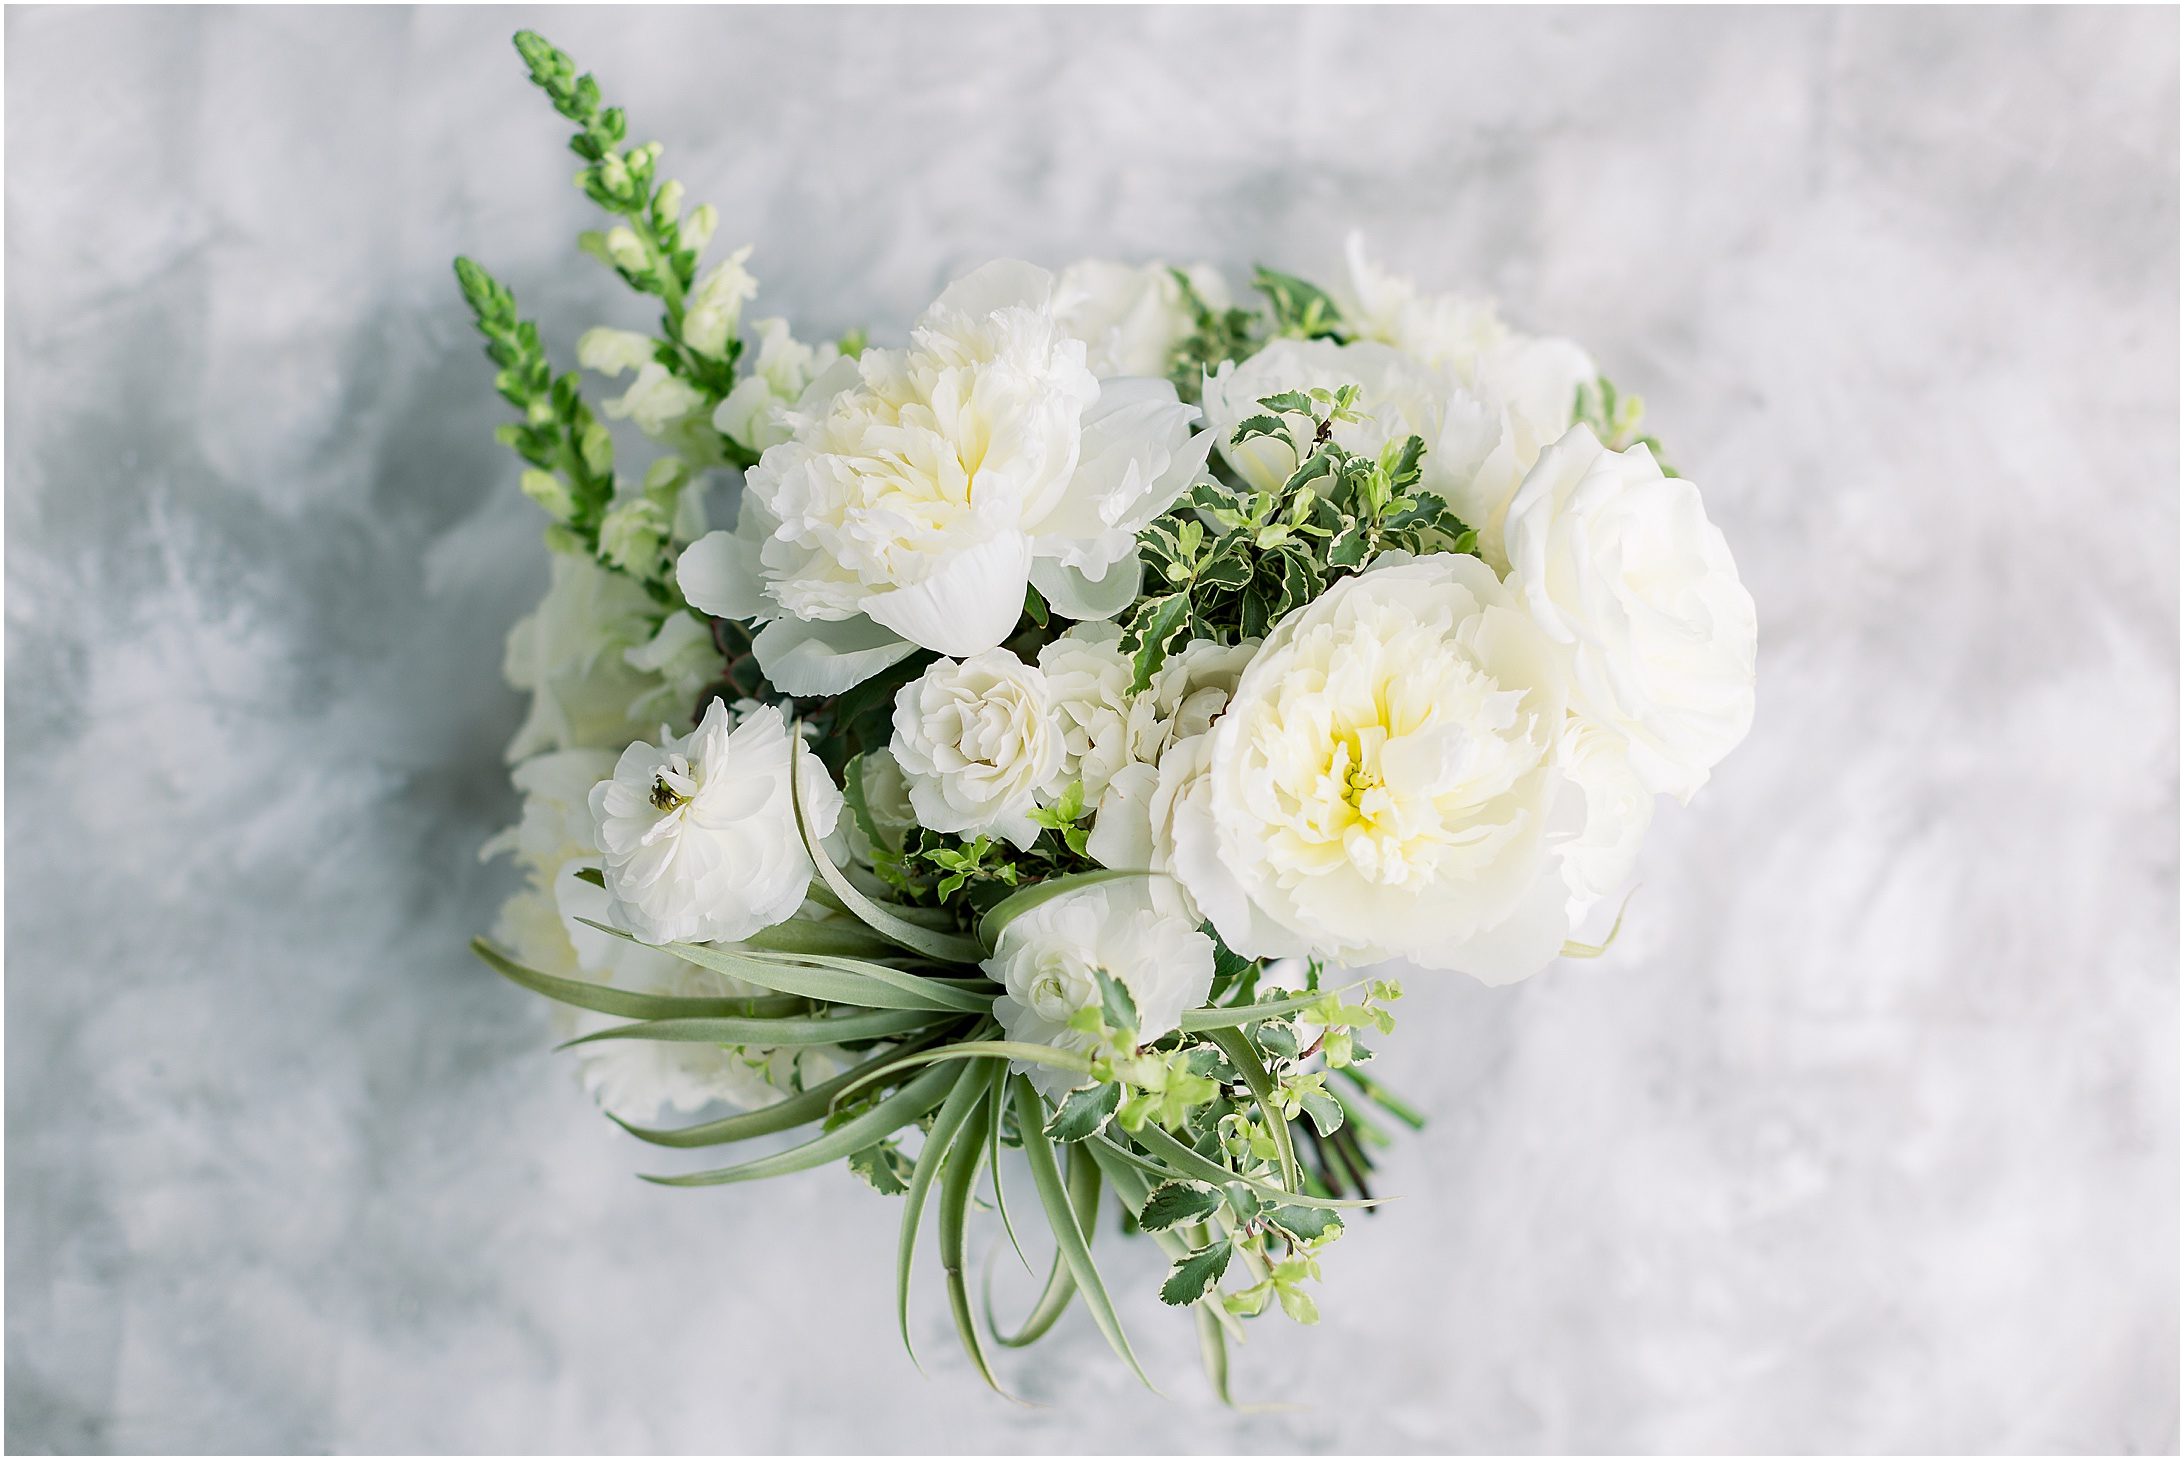 Sweet Root Village Bridal Bouquet, Bridal Details at Inter-Continental Hotel at Navy Yards in DC, Modern Textural Spring Wedding at District Winery, Sarah Bradshaw Photography, DC Wedding Photographer